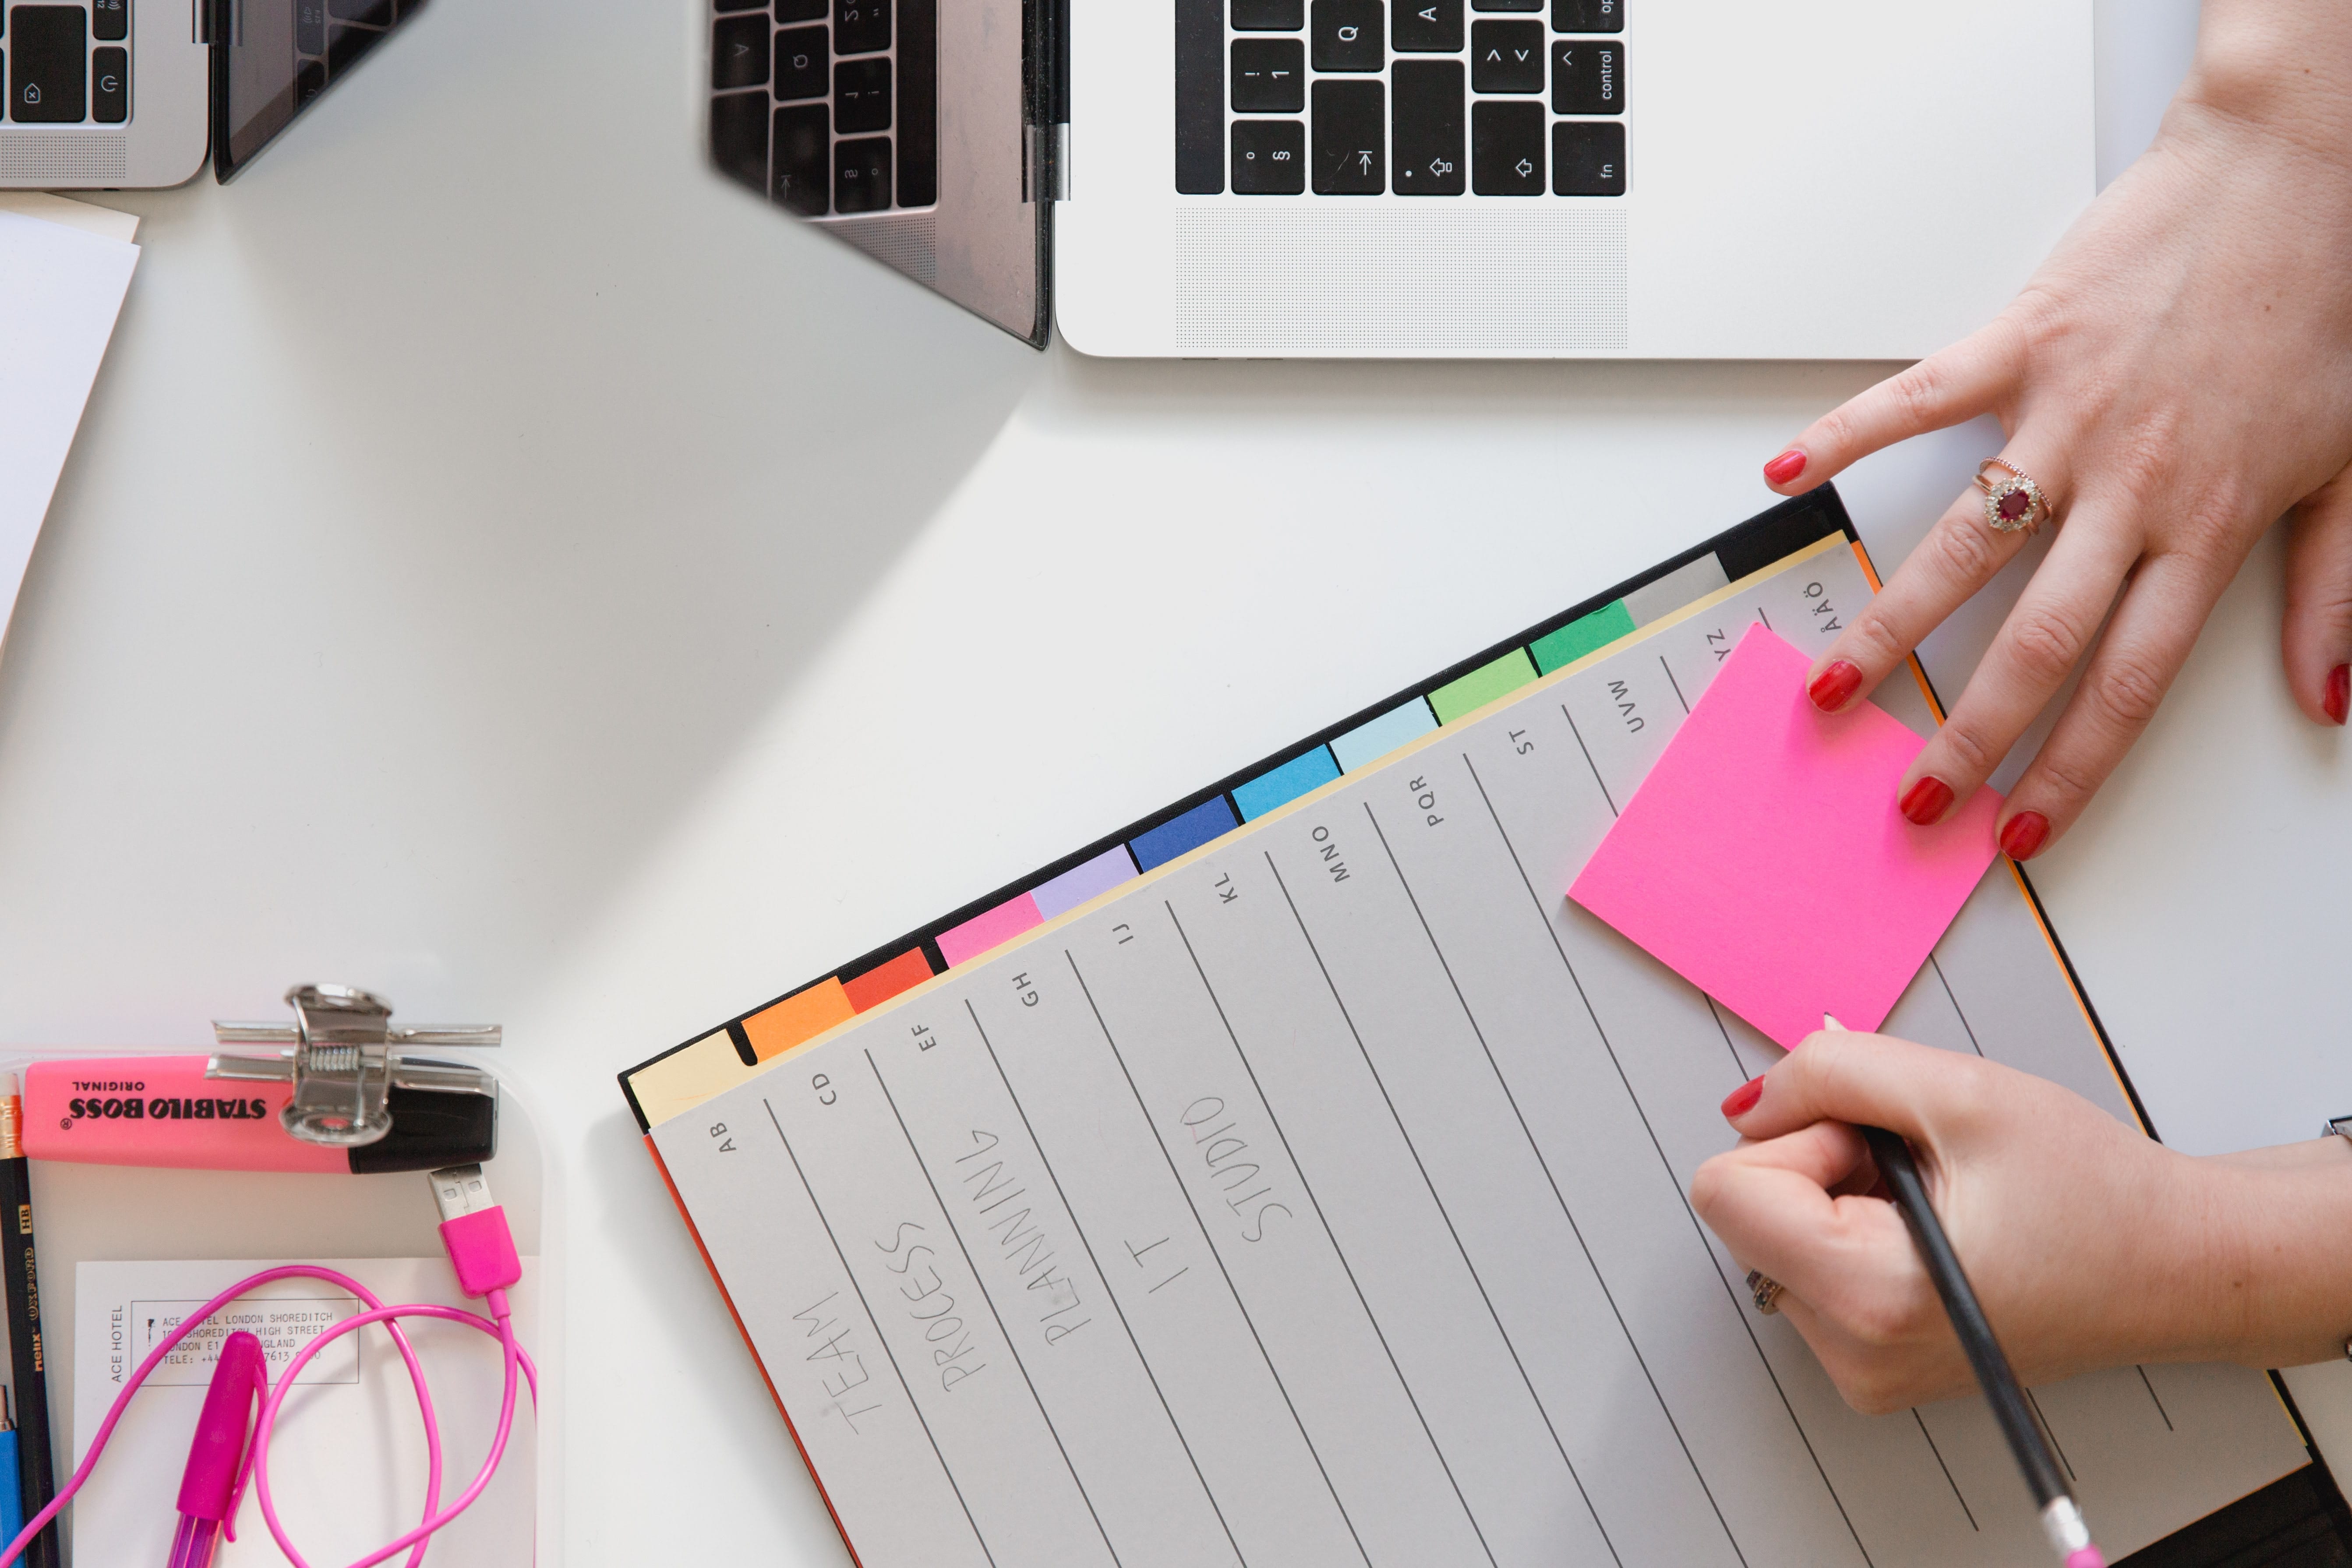 Woman holding pencil and pink sticky note next to laptop and planner; image by Marten Bjork, via Unsplash.com.